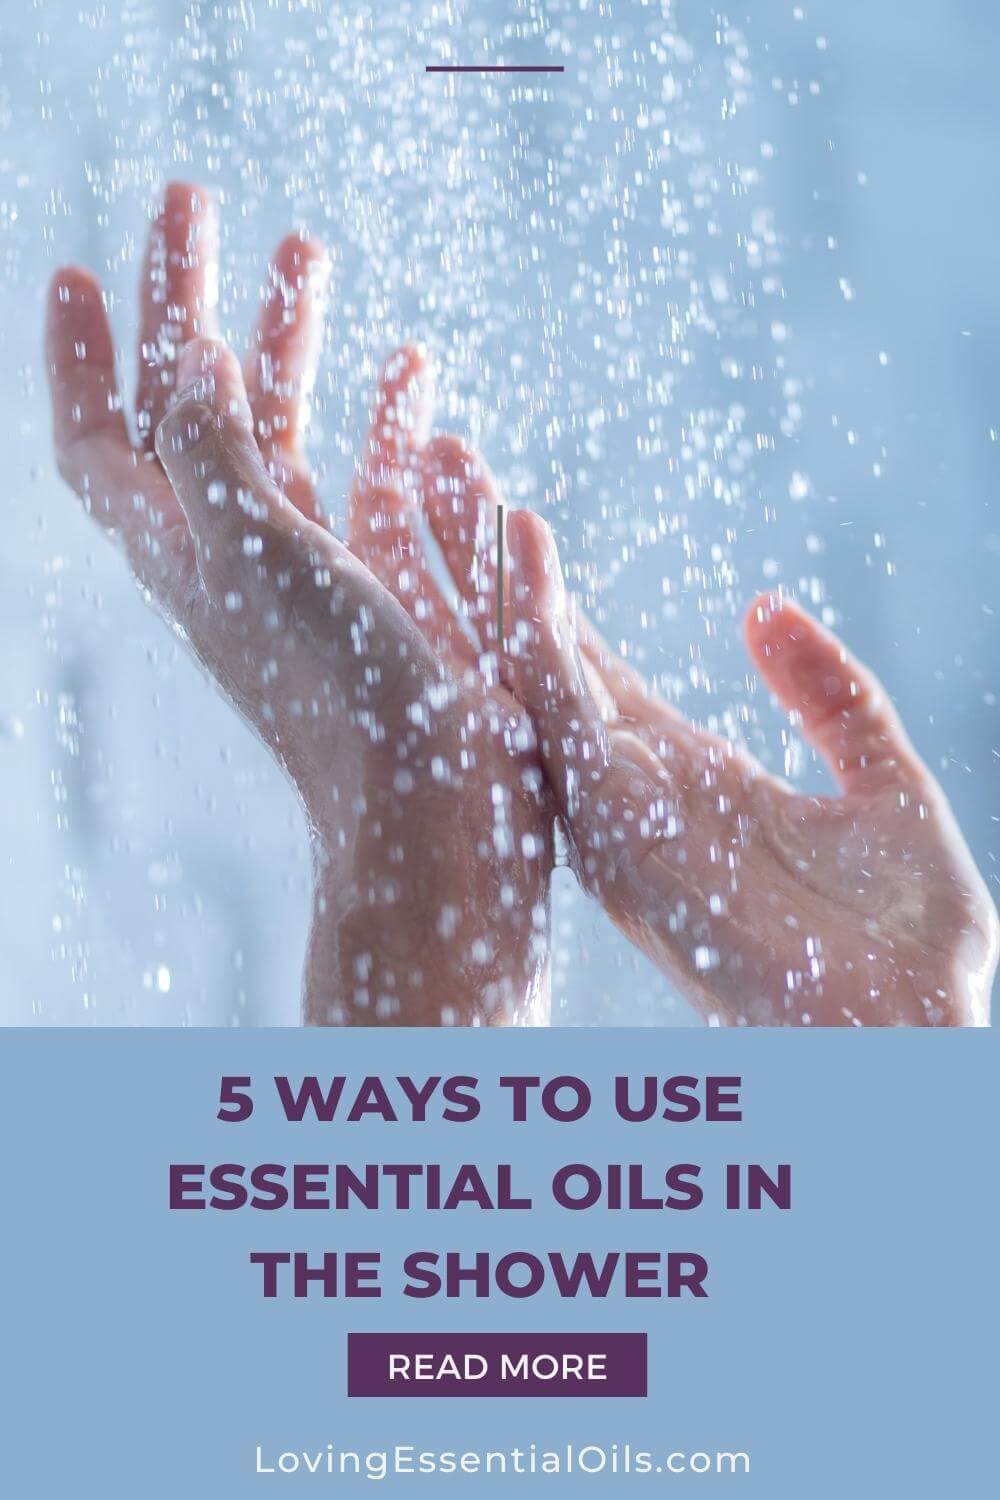 Using Essential Oils in the Shower by Loving Essential Oils | Try using lavender, peppermint, eucalyptus or lemon and see the benefits that can be gained!